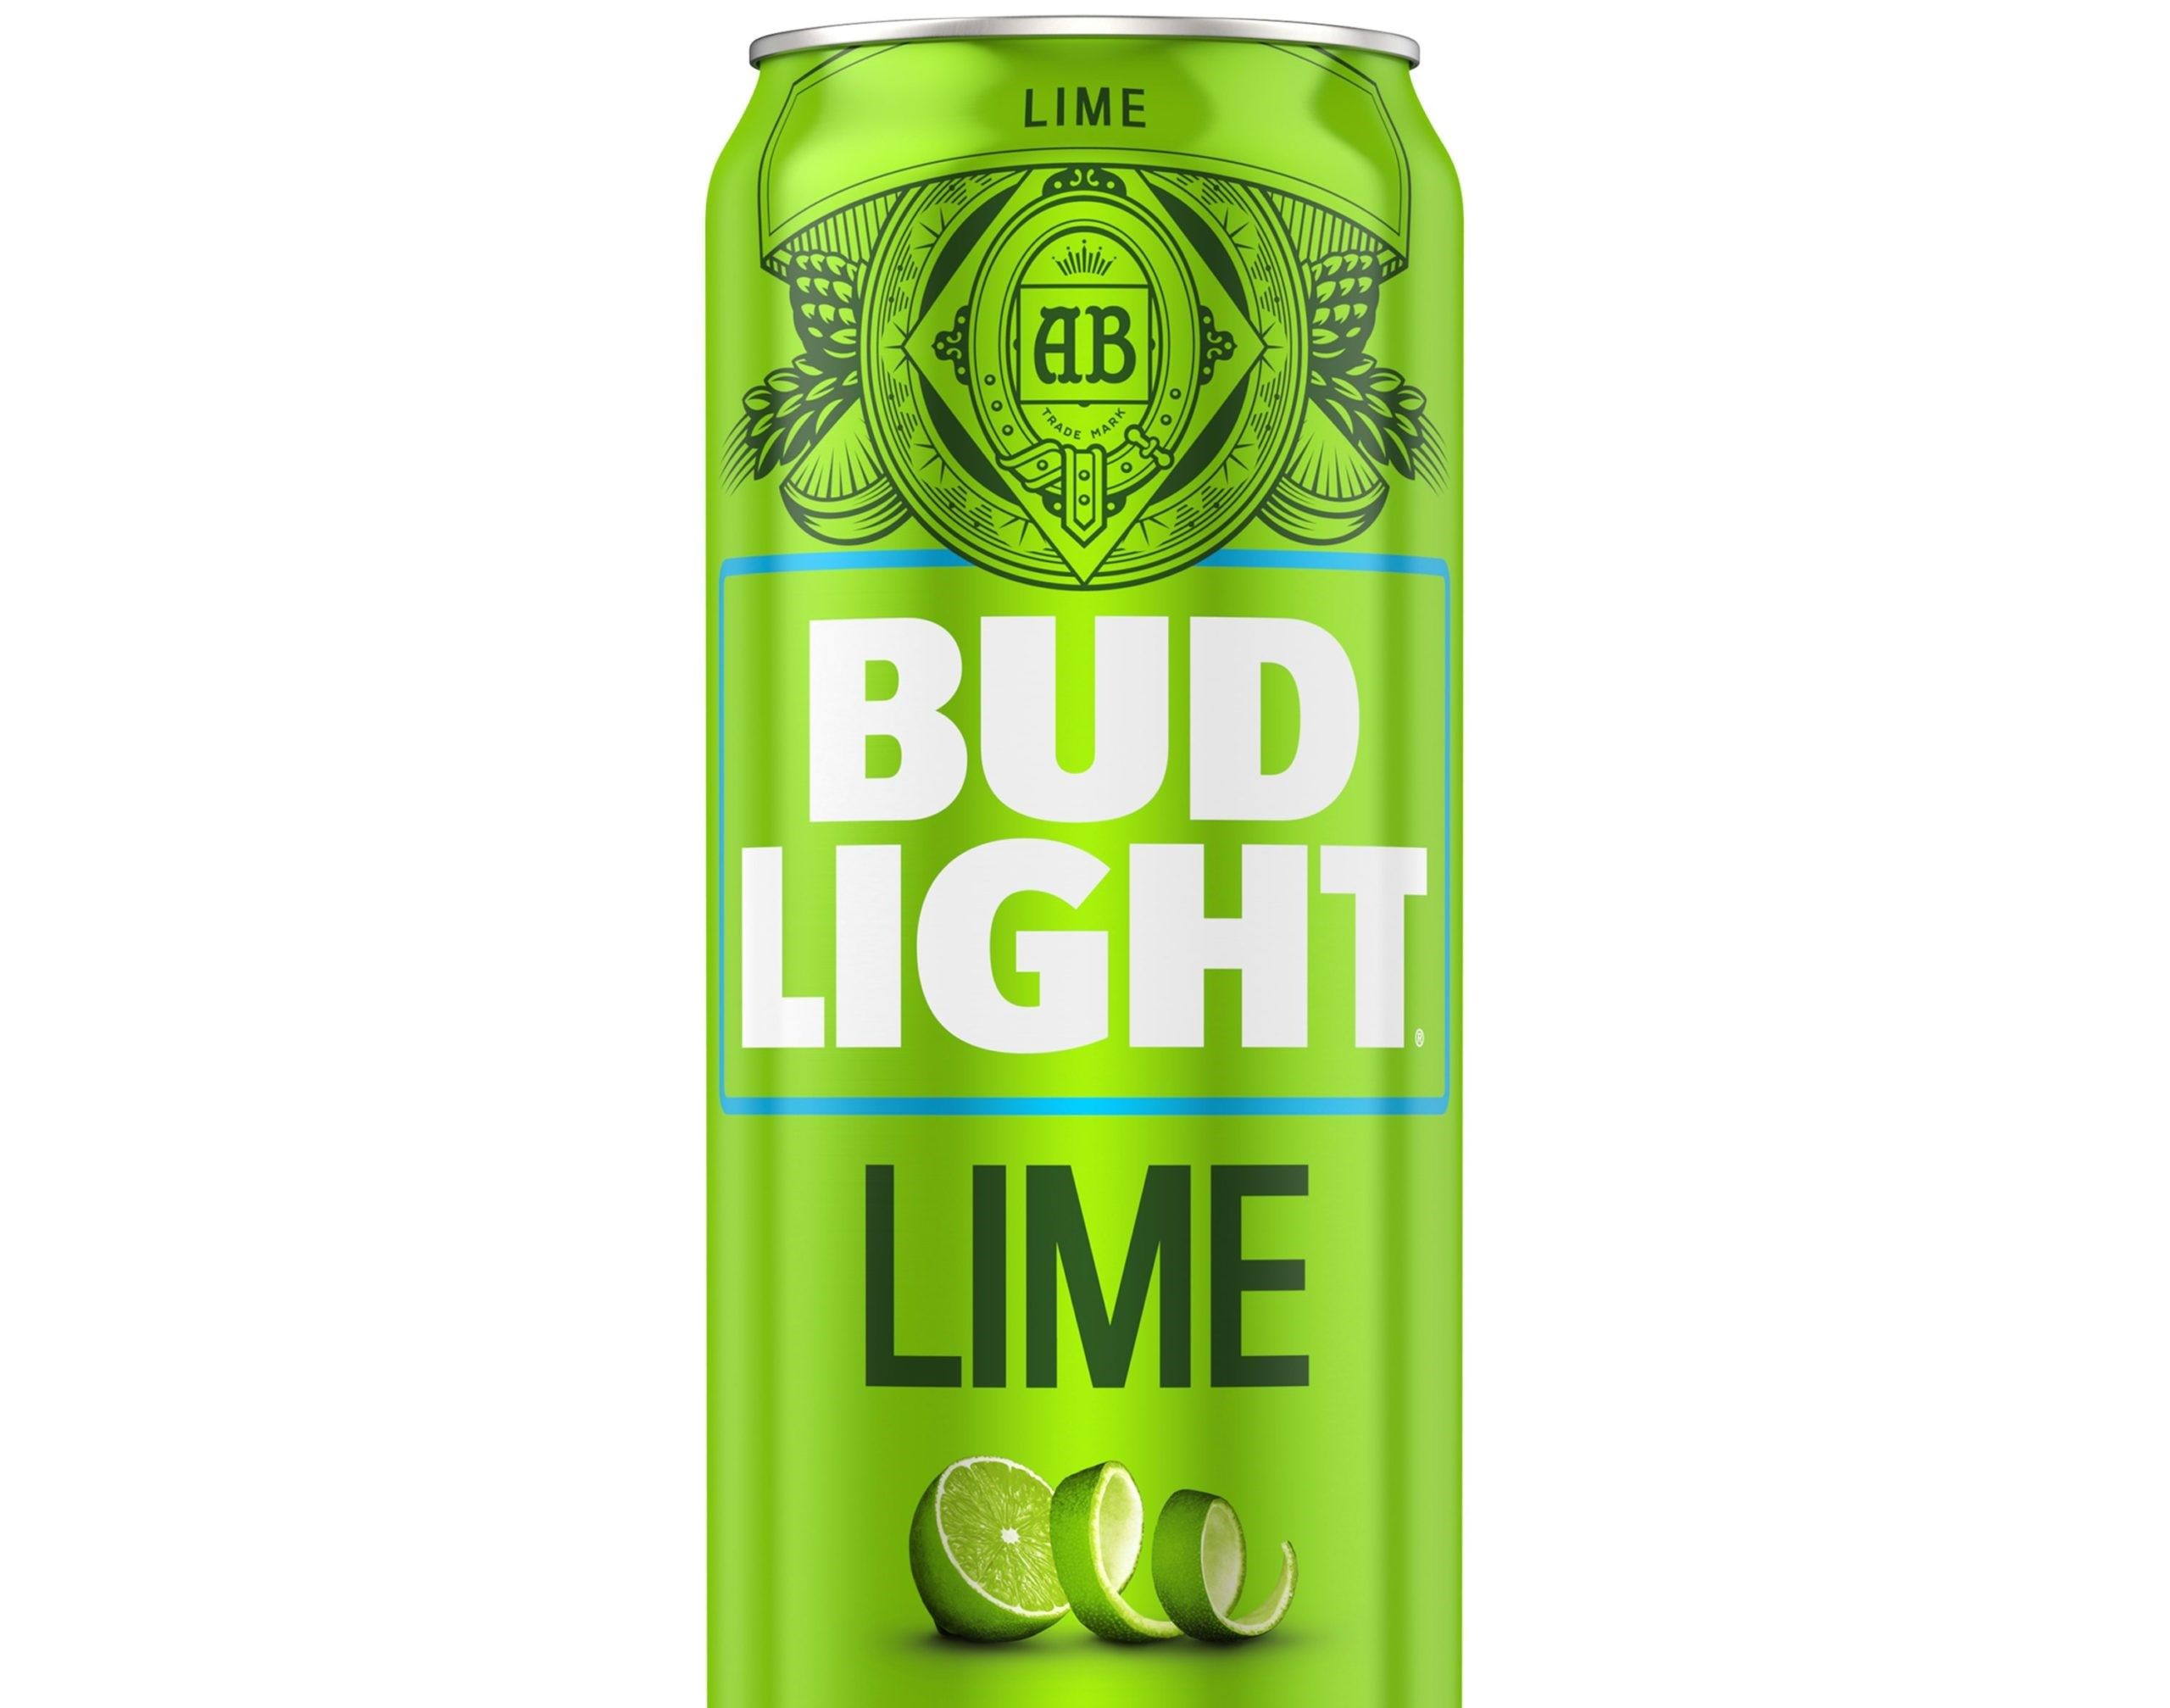 15-bud-light-lime-nutrition-facts